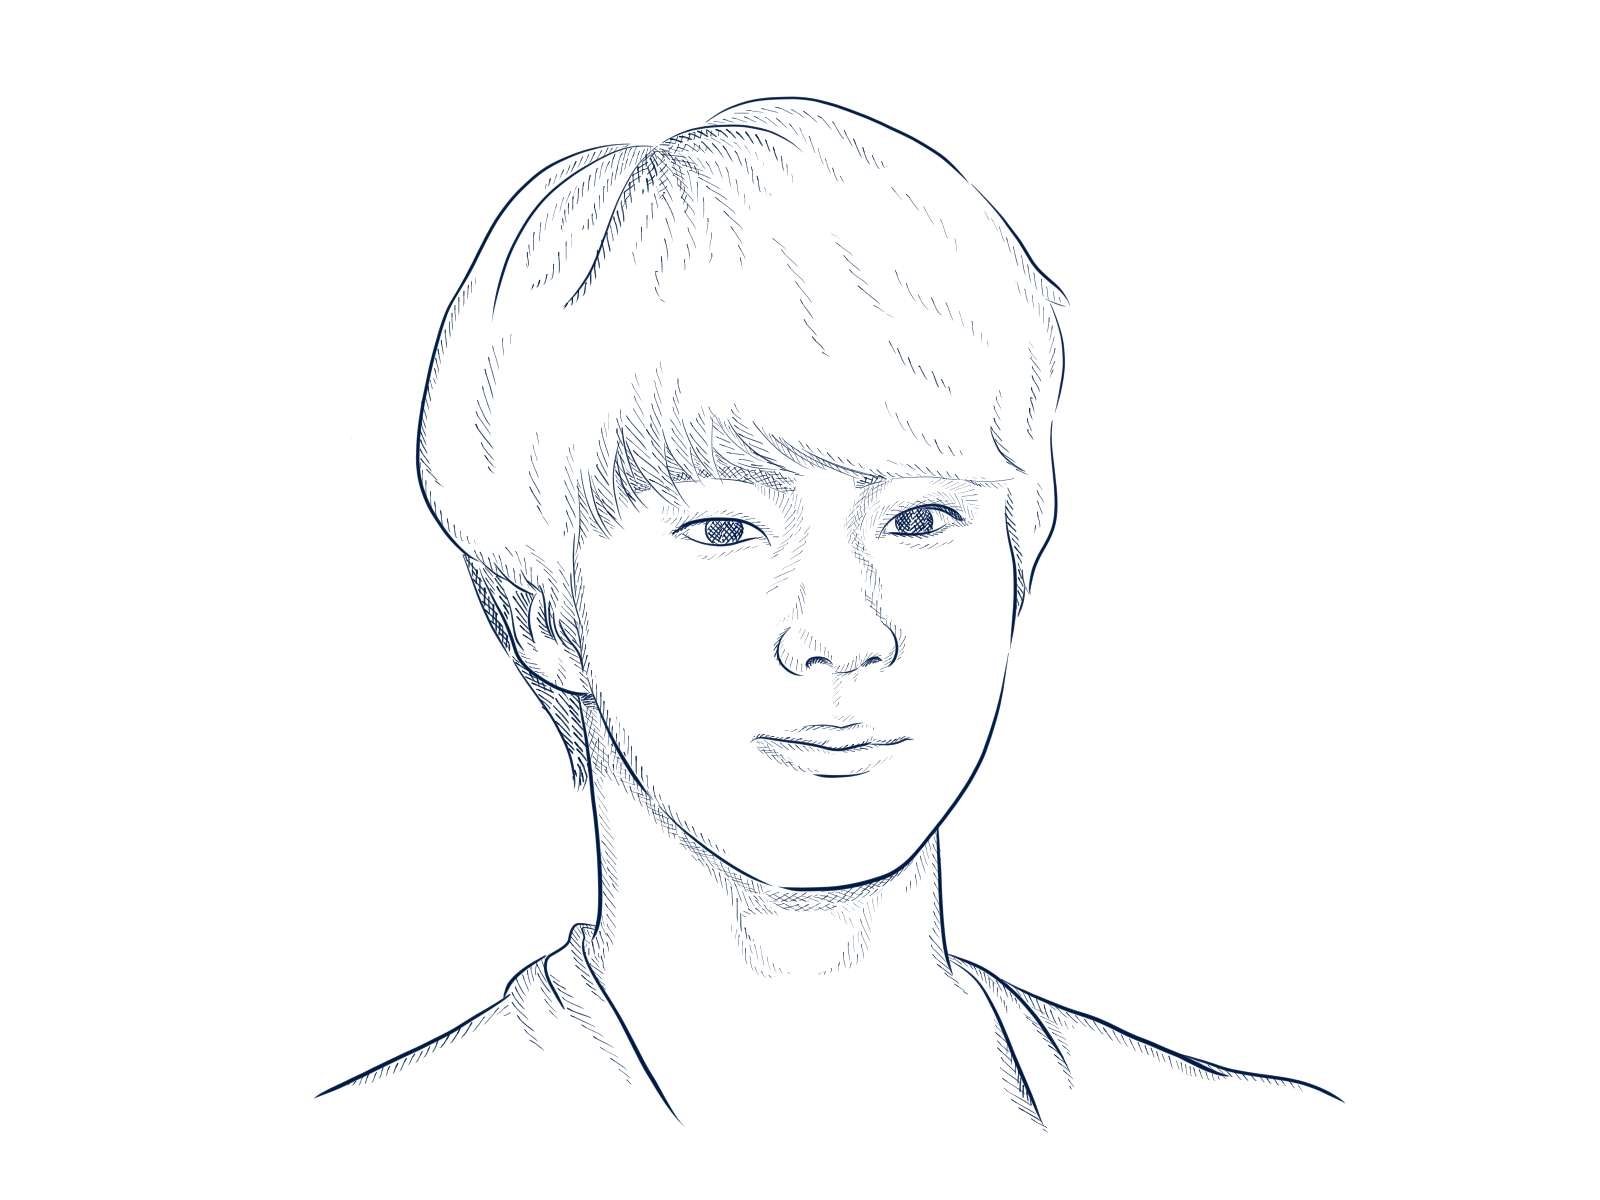 Light Arts - another sketch of bts member Jin. ^^ confused sexy gaze ^^